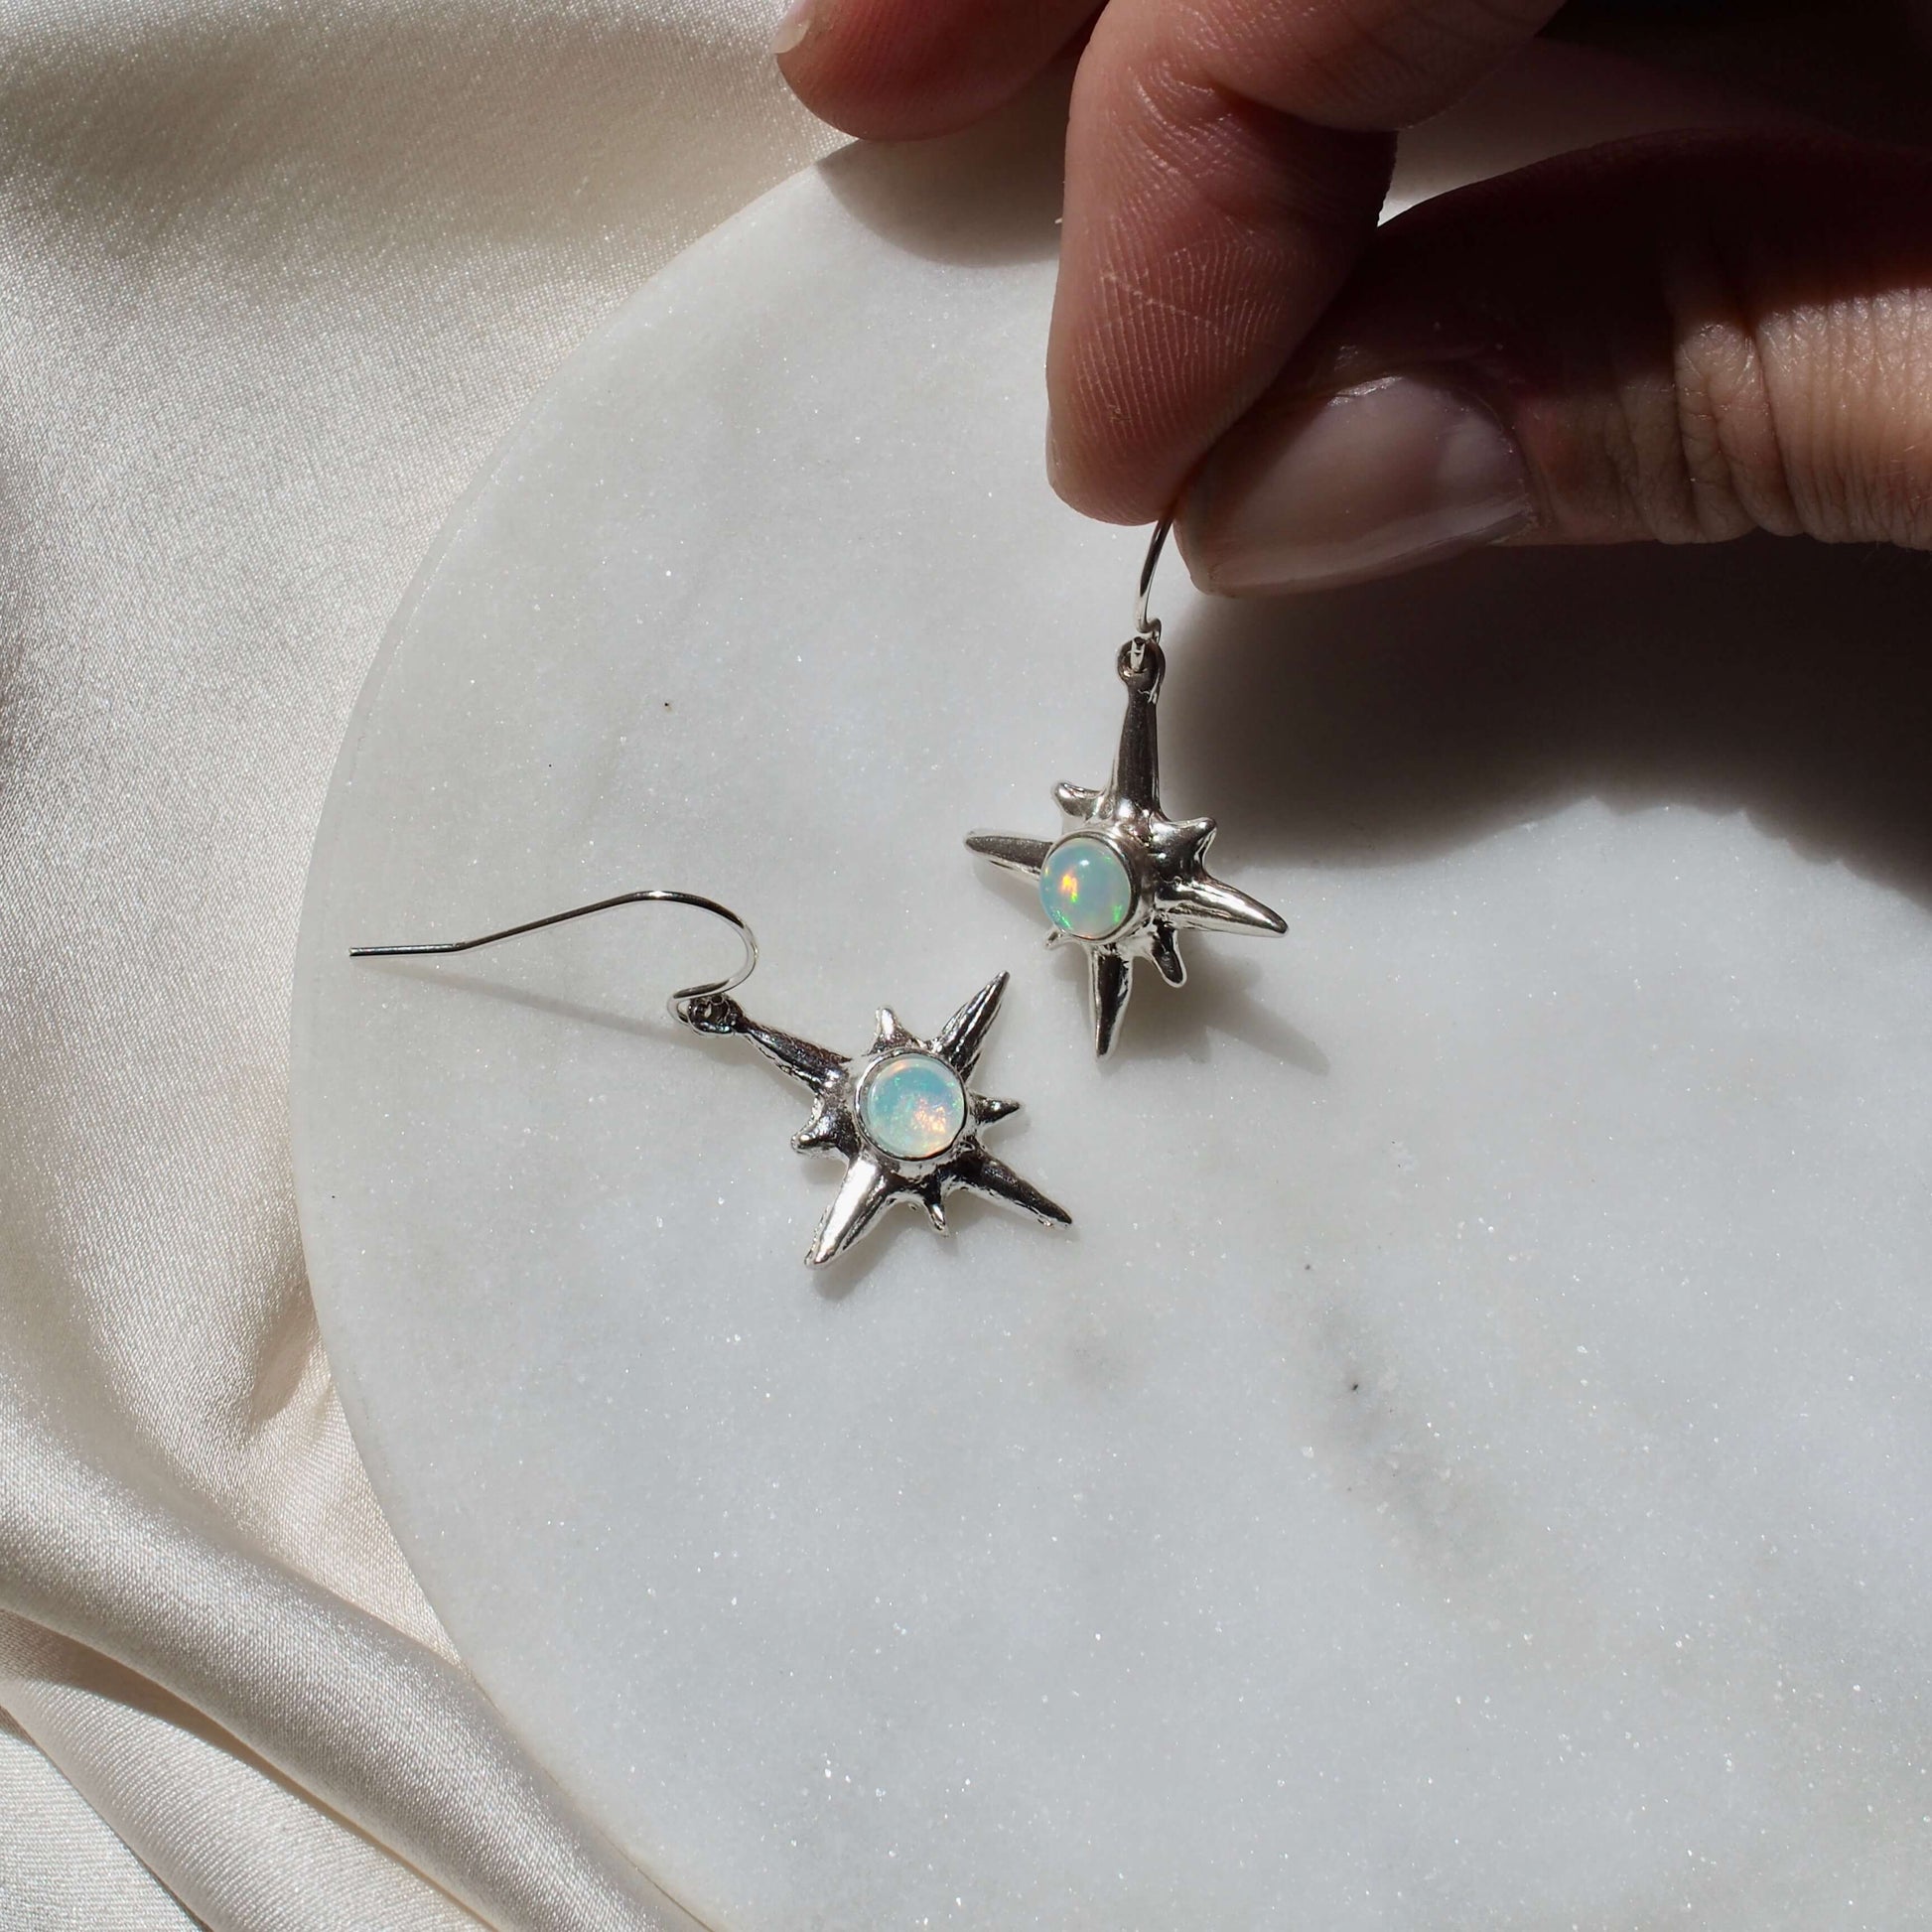 North Star earrings set with sustainably sourced opal artisan made jewelry by Iron Oxide Designs